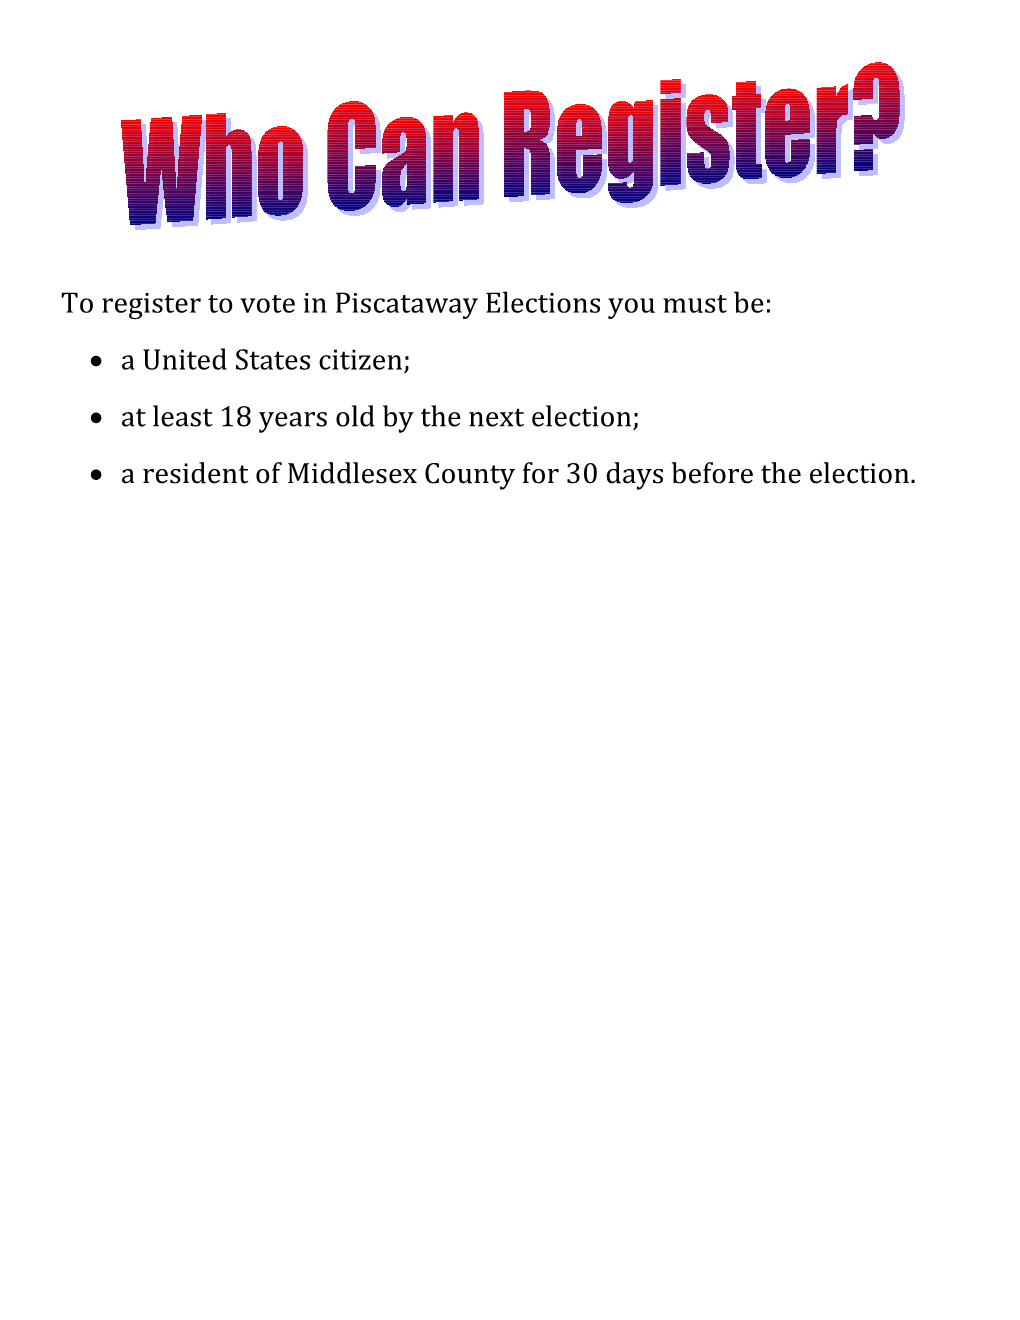 To Register to Vote in Piscataway Elections You Must Be